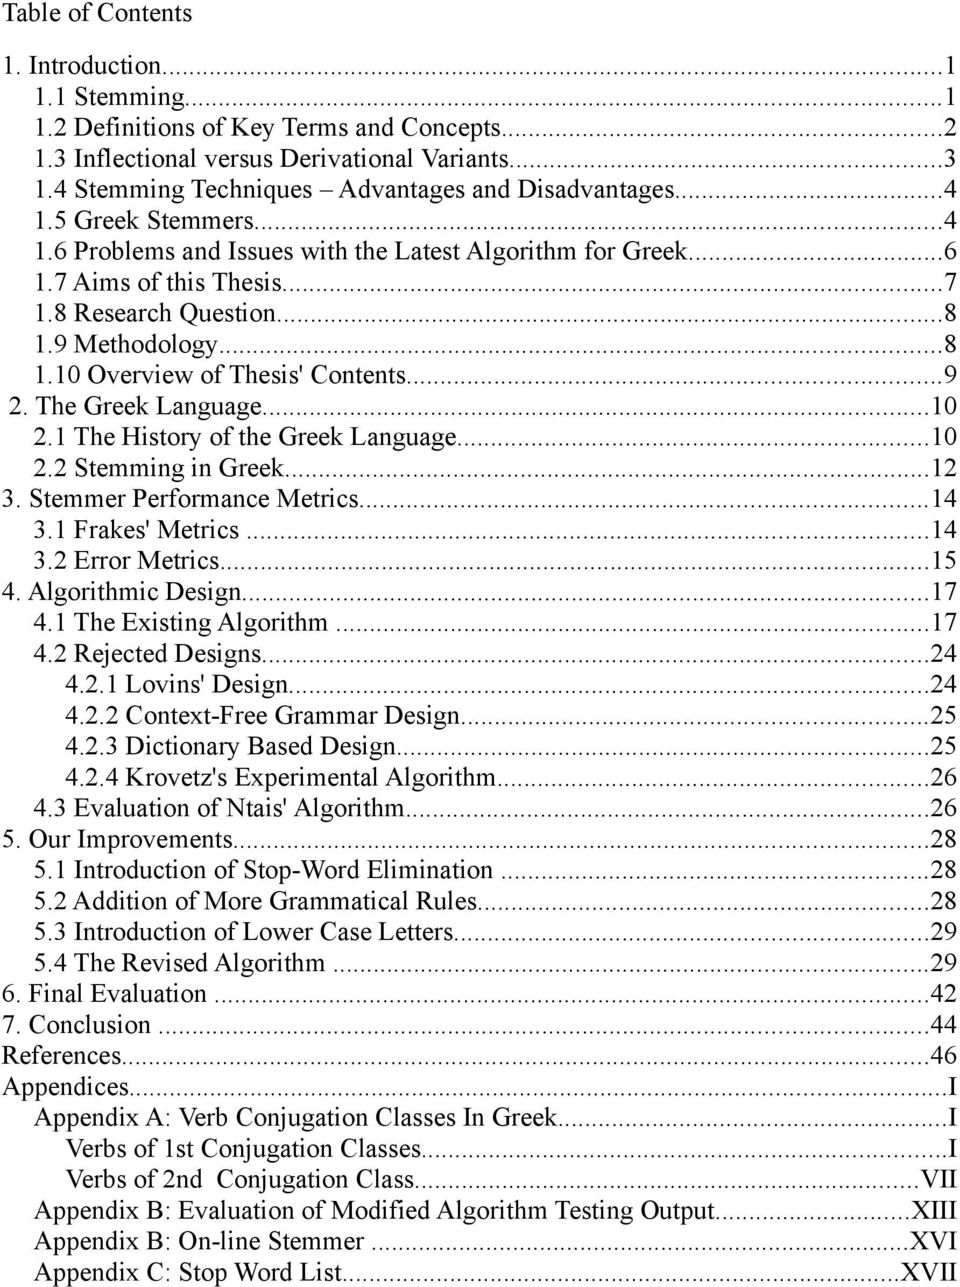 9 Methodology...8 1.10 Overview of Thesis' Contents...9 2. The Greek Language...10 2.1 The History of the Greek Language...10 2.2 Stemming in Greek...12 3. Stemmer Performance Metrics...14 3.